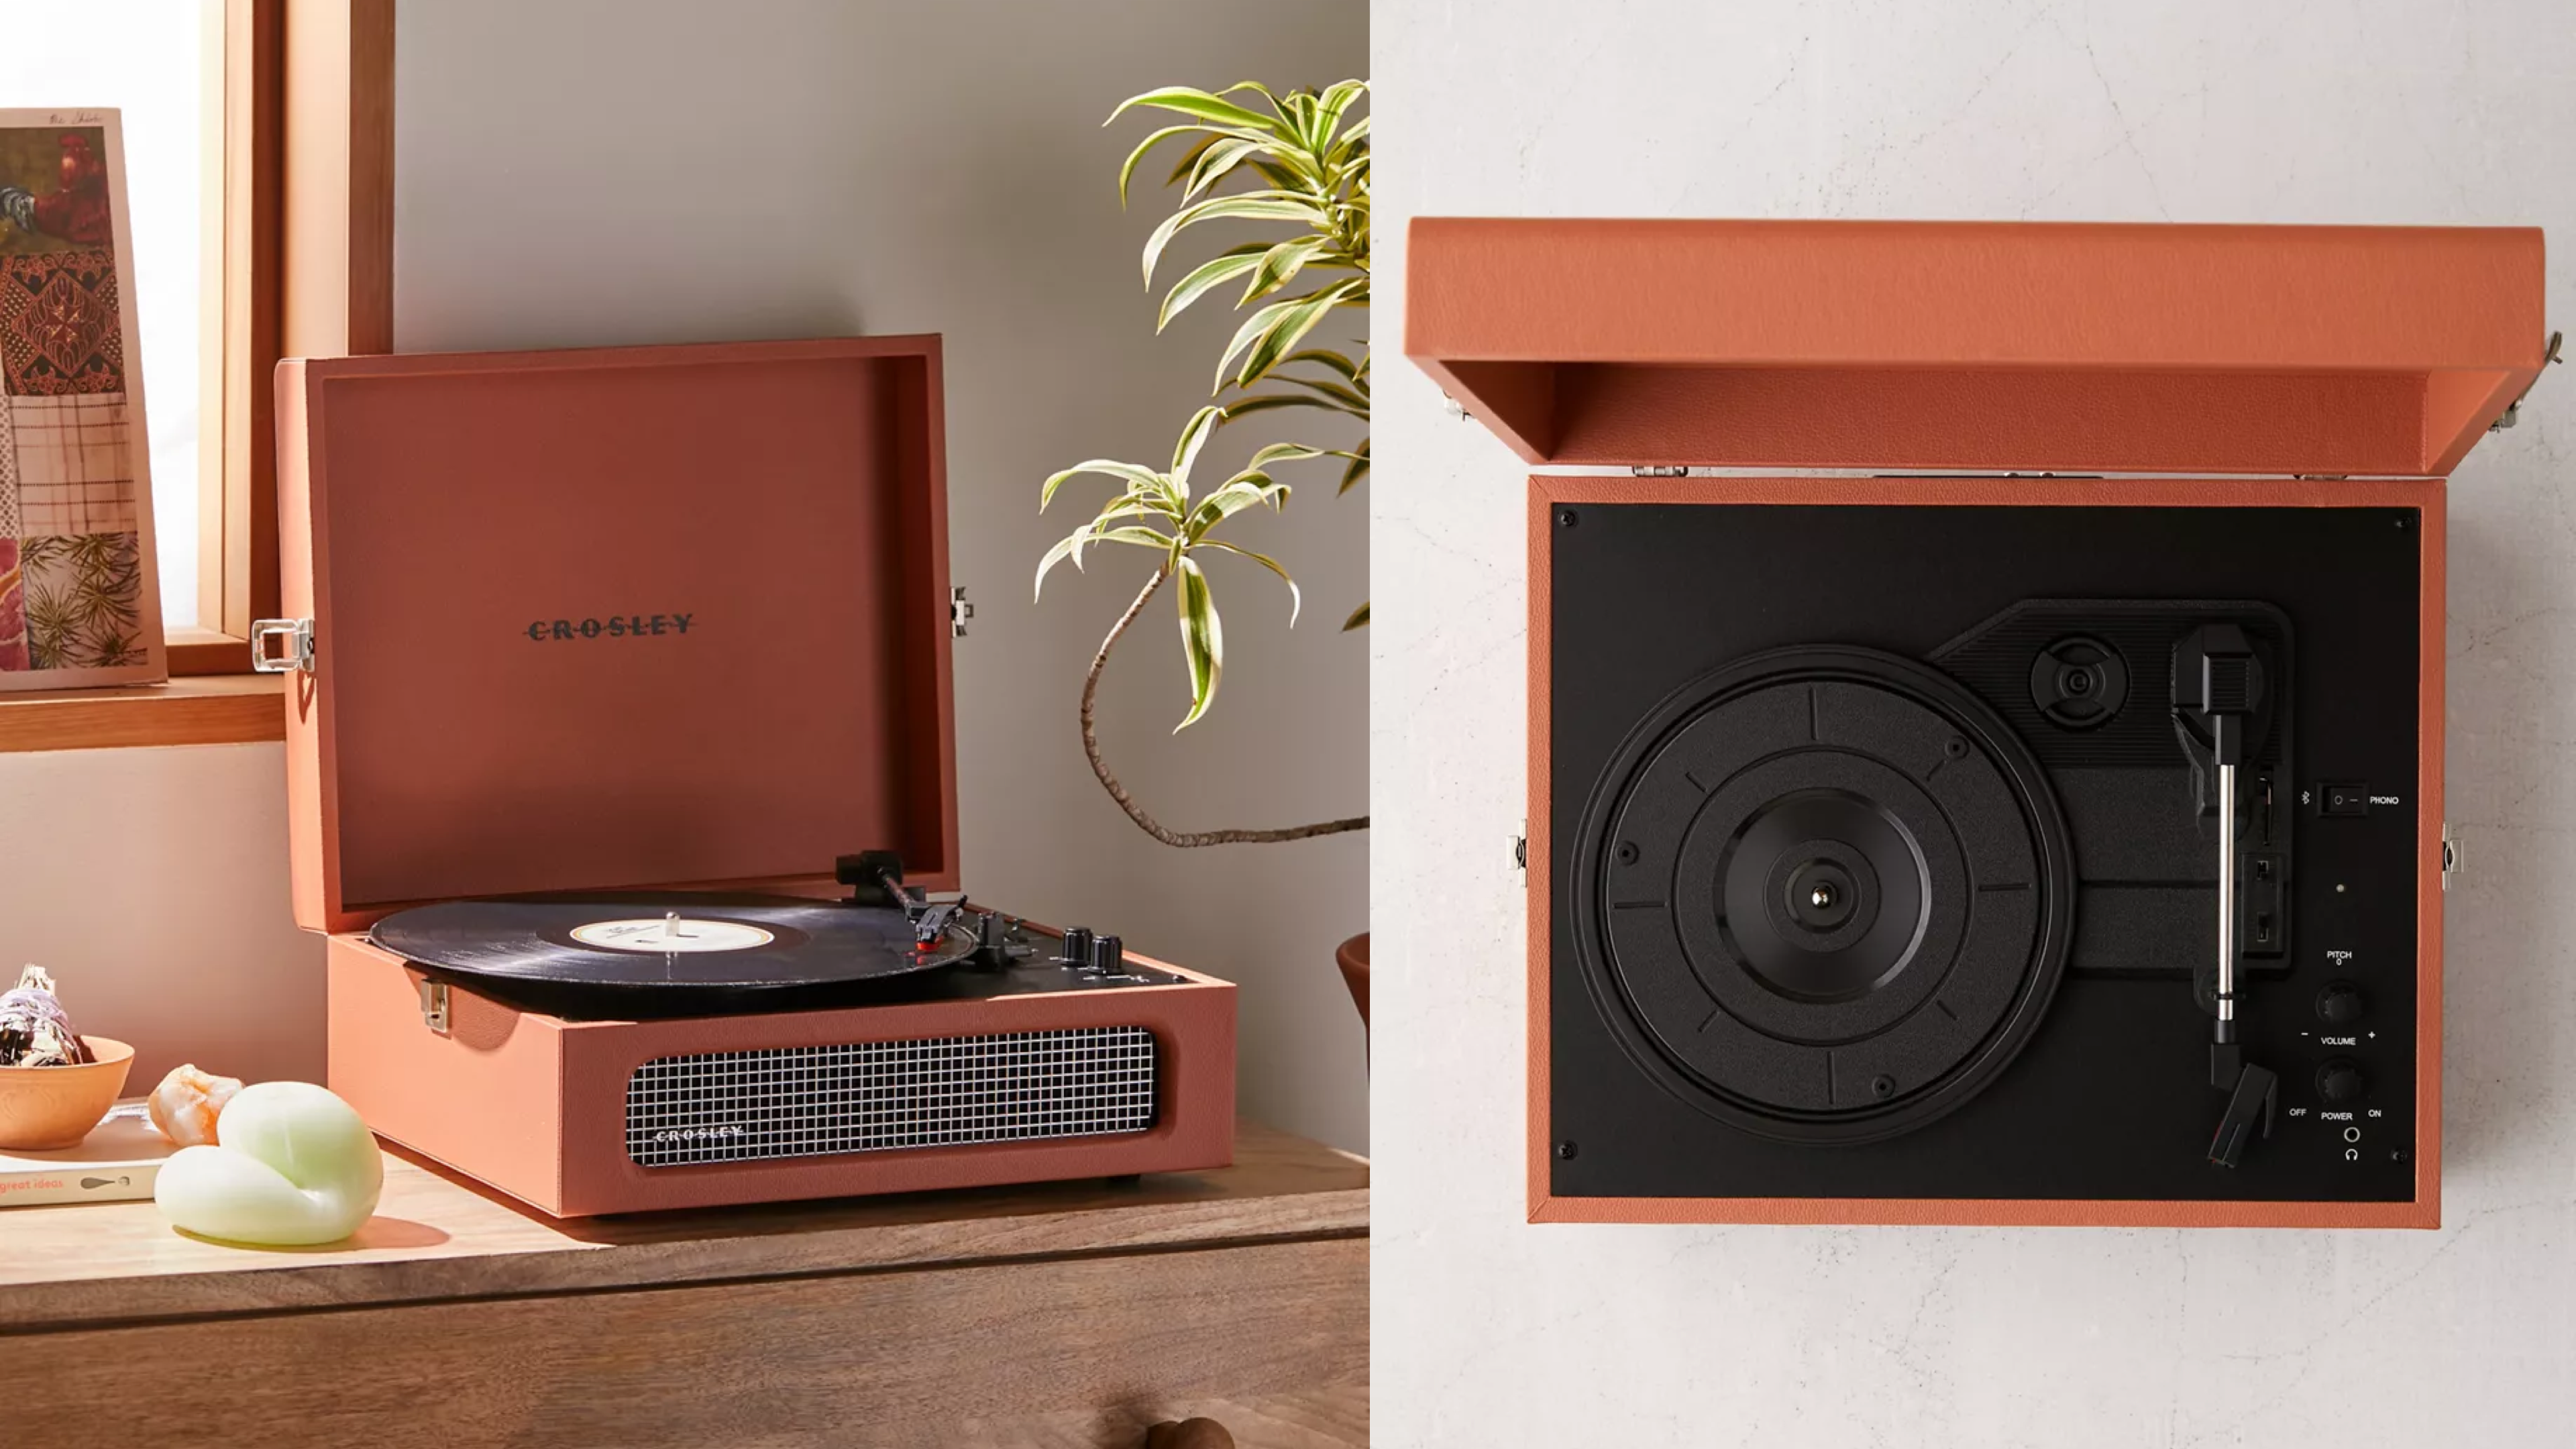 A retro-looking record player